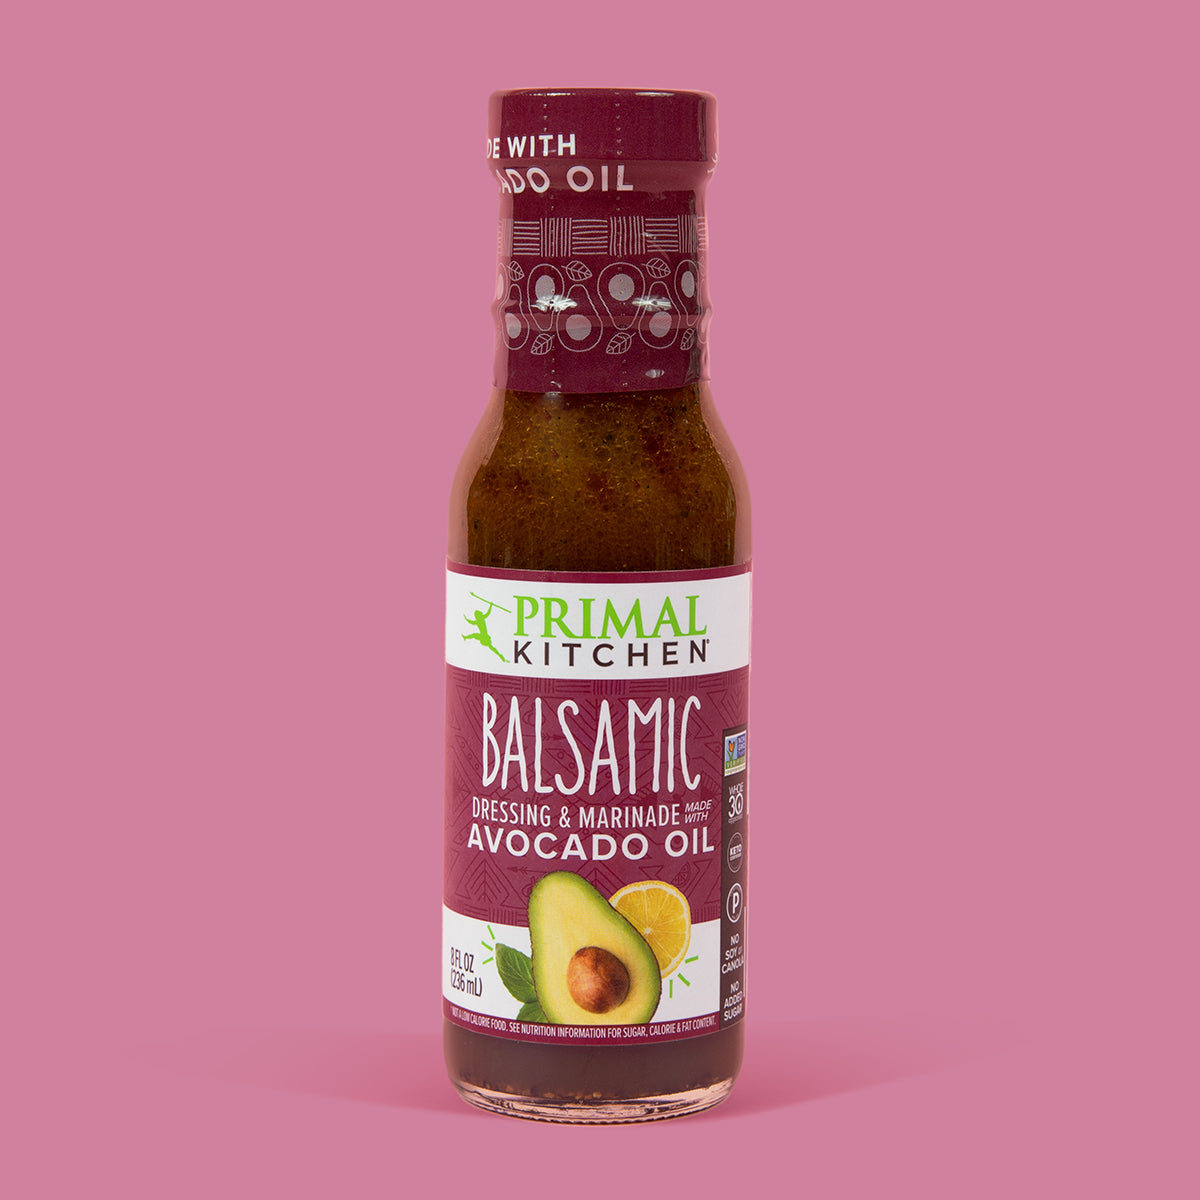 A bottle of Primal Kitchen Balsamic Vinaigrette and Marinade made with Avocado Oil with a dark purple label on a light pink background.